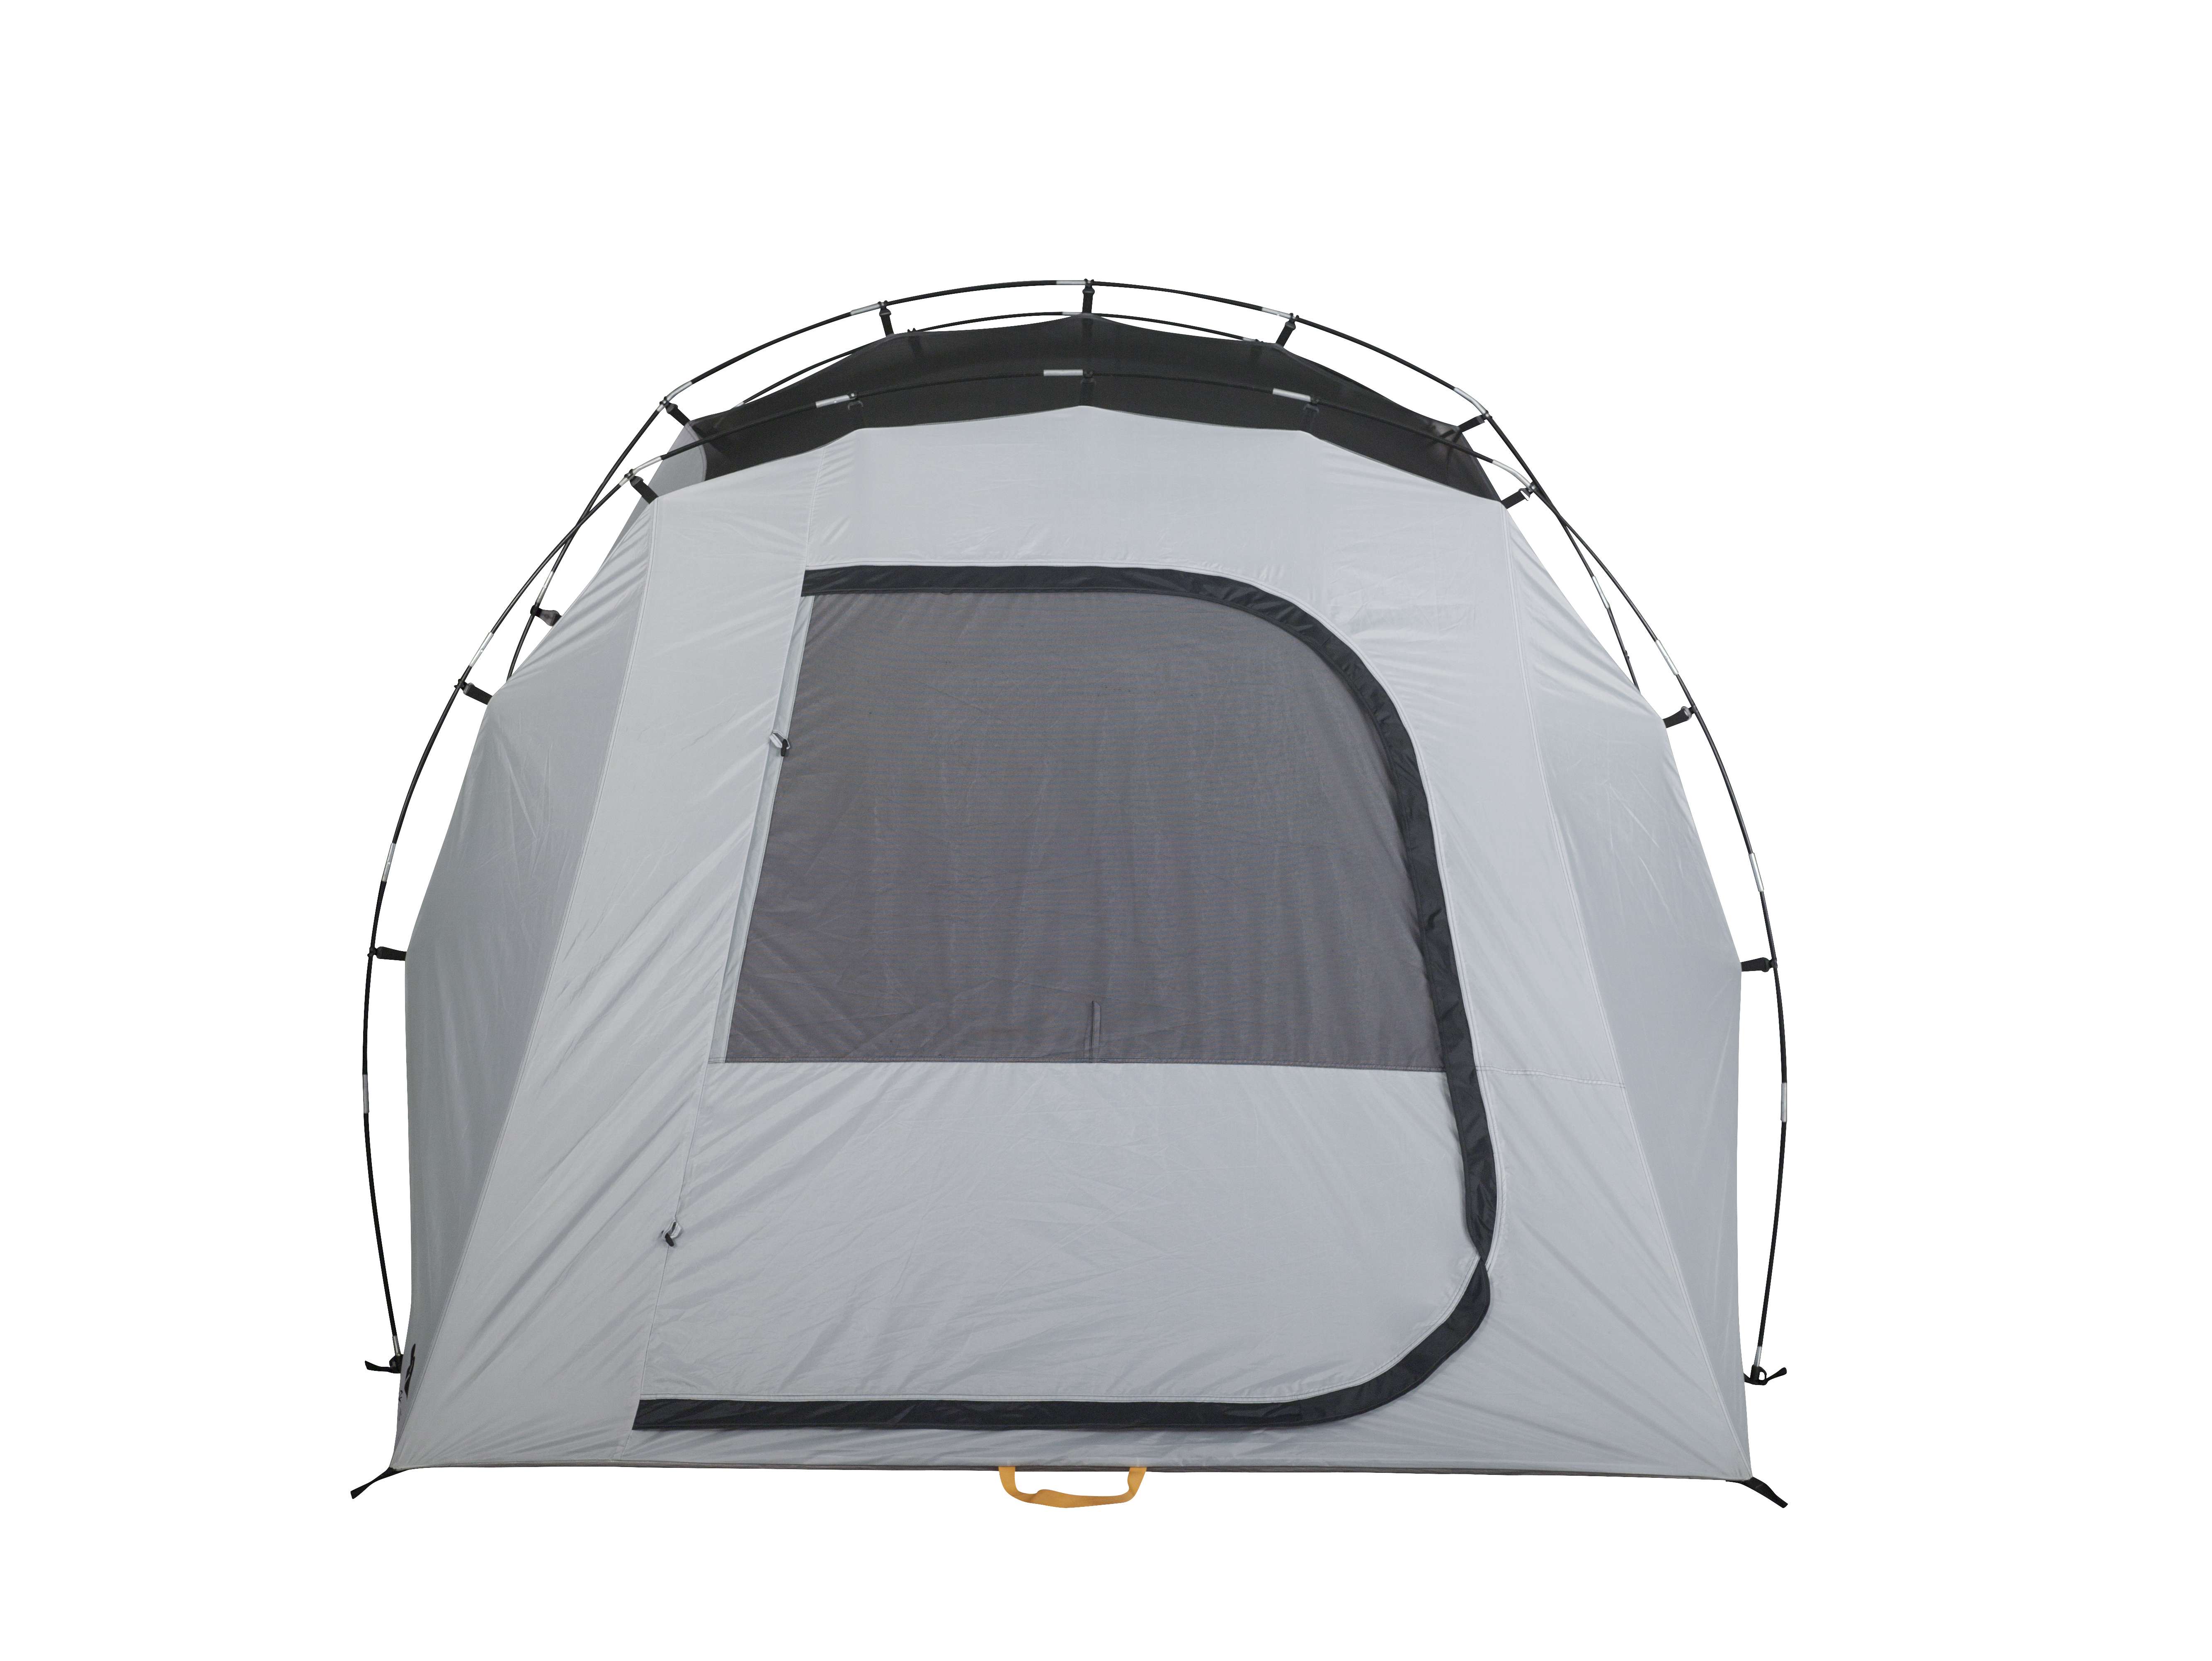 Ozark Trail 8 Person, Clip & Camp Family Tent, 16 ft. x 8 ft. x 78 in., 23.81 lbs. - image 5 of 15